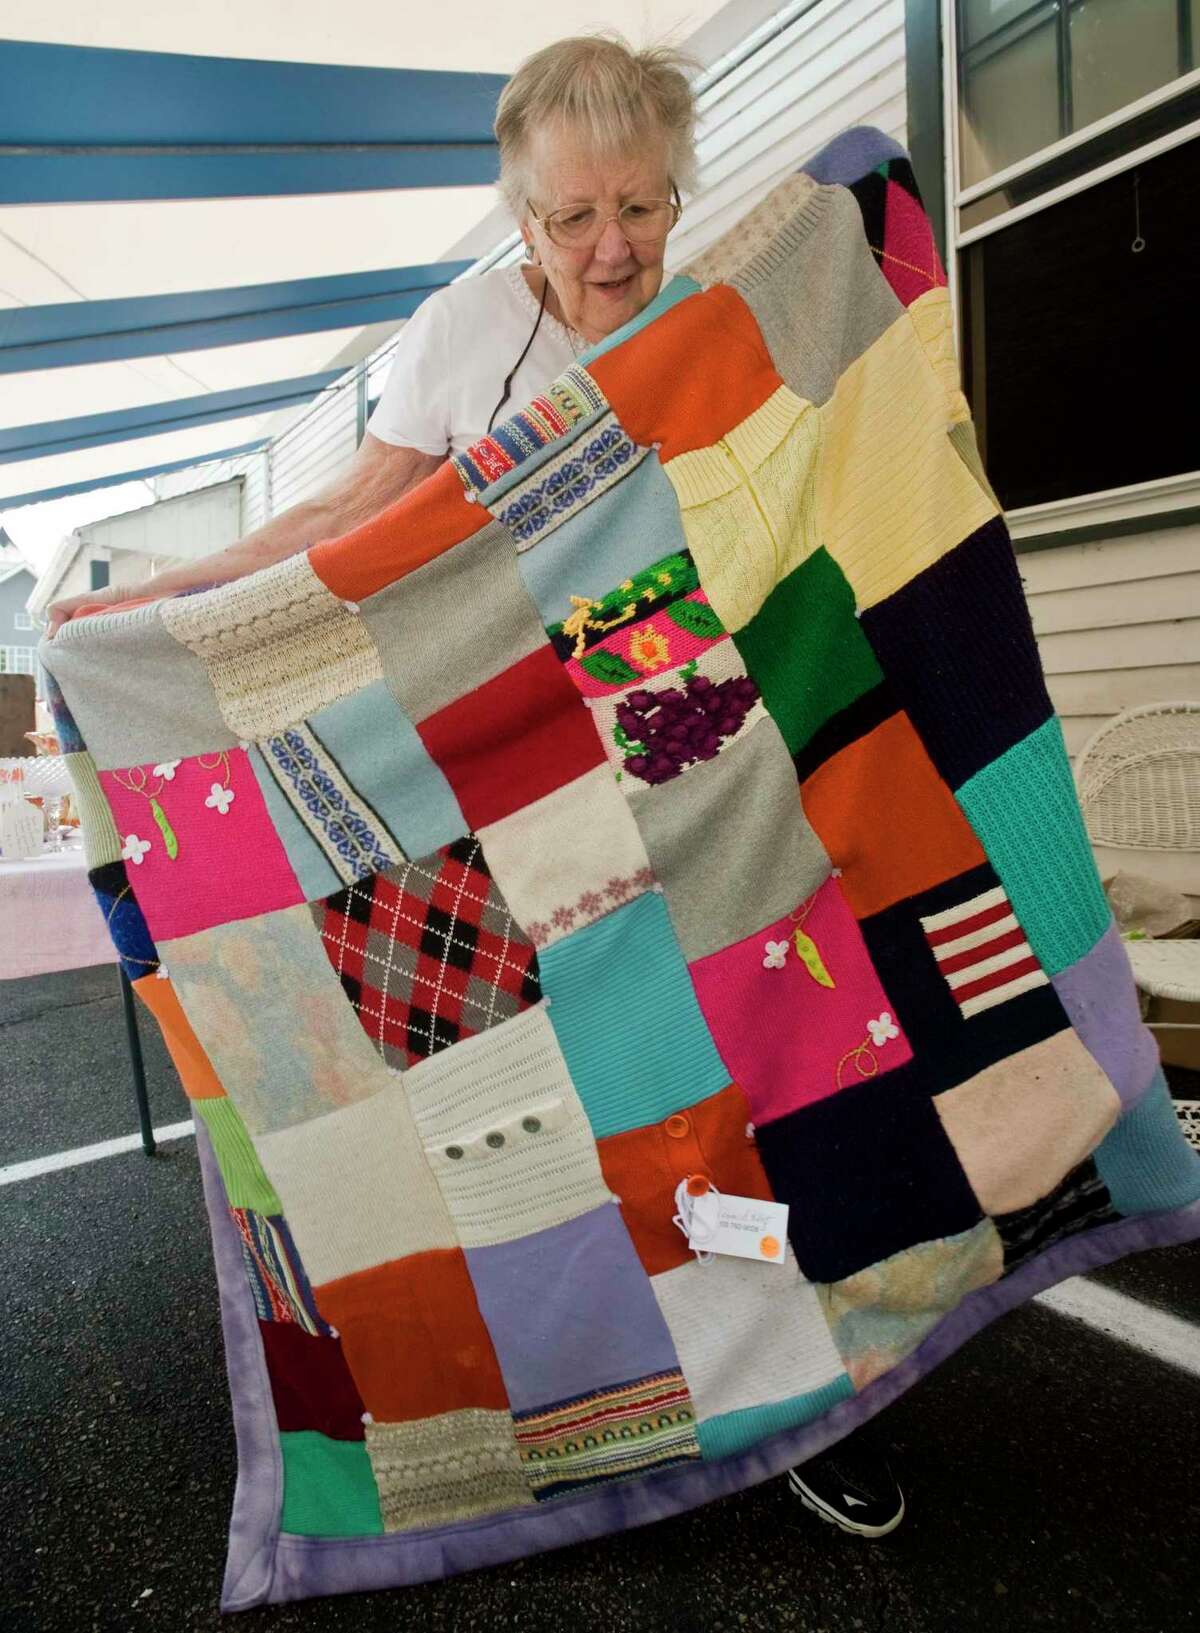 Ann Klotz, of Wilton, won a first place ribbon for one of her quilts at the 86th Annual Cannon Grange Agricultural Fair in 2018. This year, sewing and needlework projects will be entered virtually.